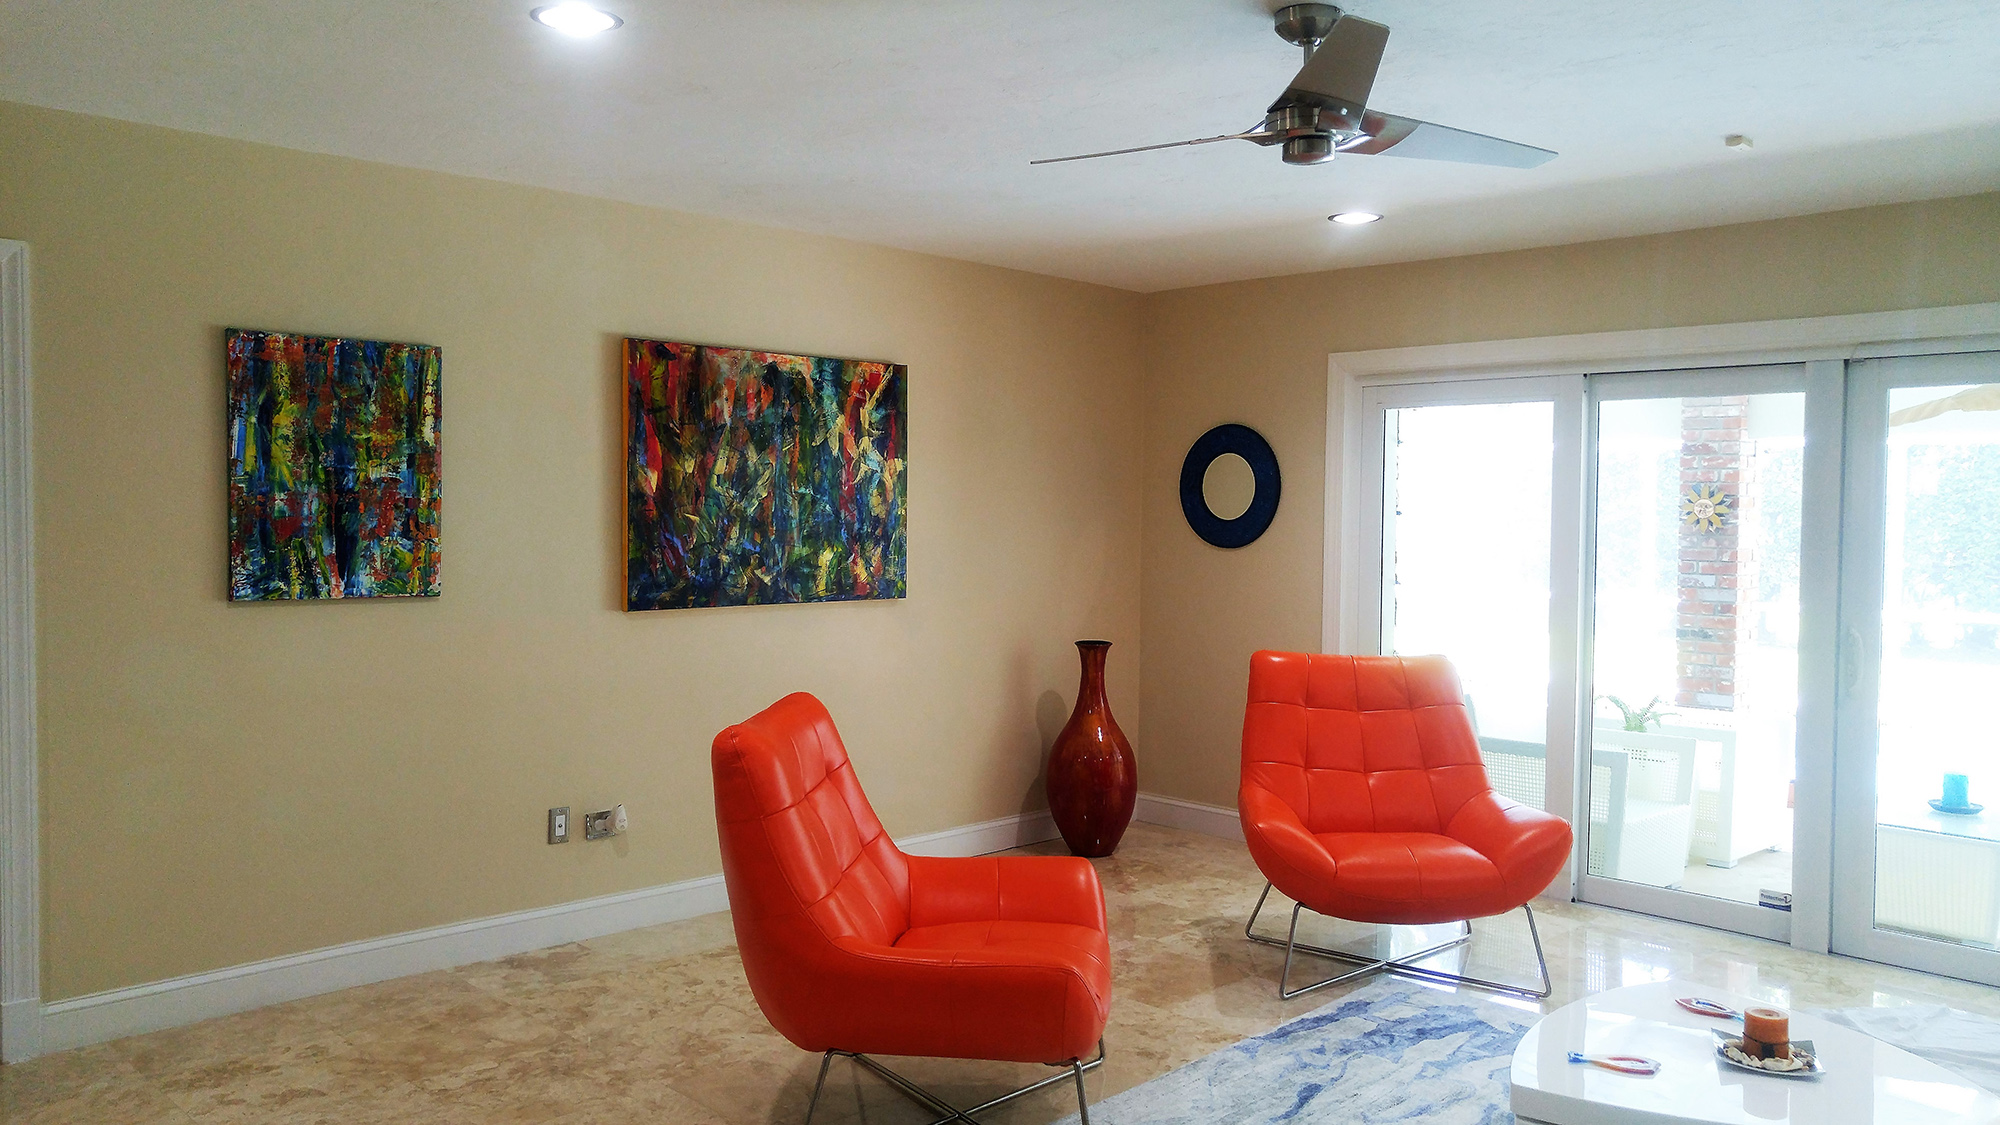 SOLD artwork displayed in the collector's home in Florida. They look amazing in that bright cheerful room!